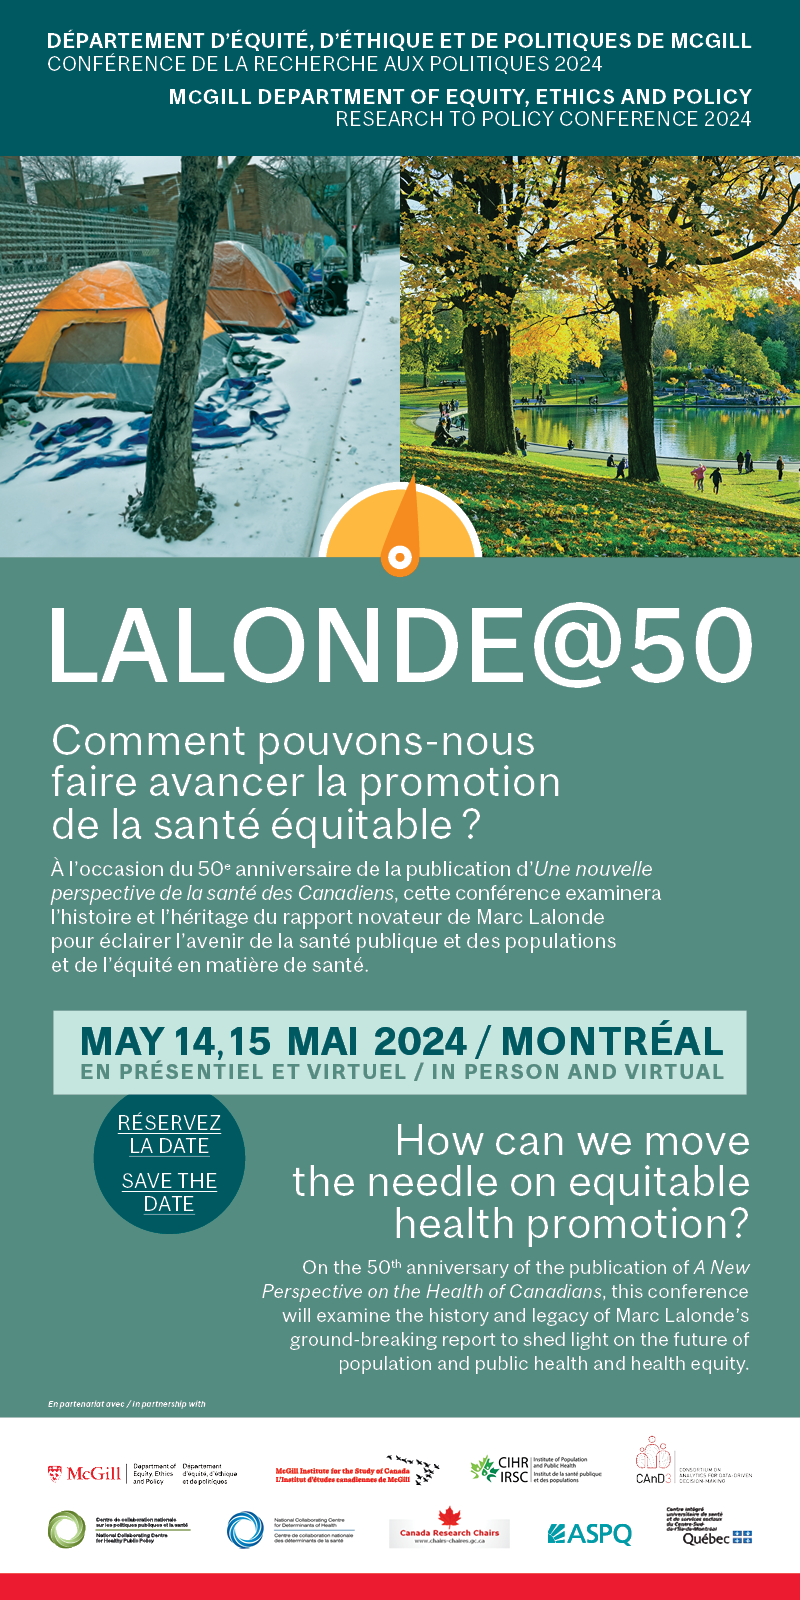 Conference Lalonde@50: How Can We Move the Needle on Equitable Health Promotion?